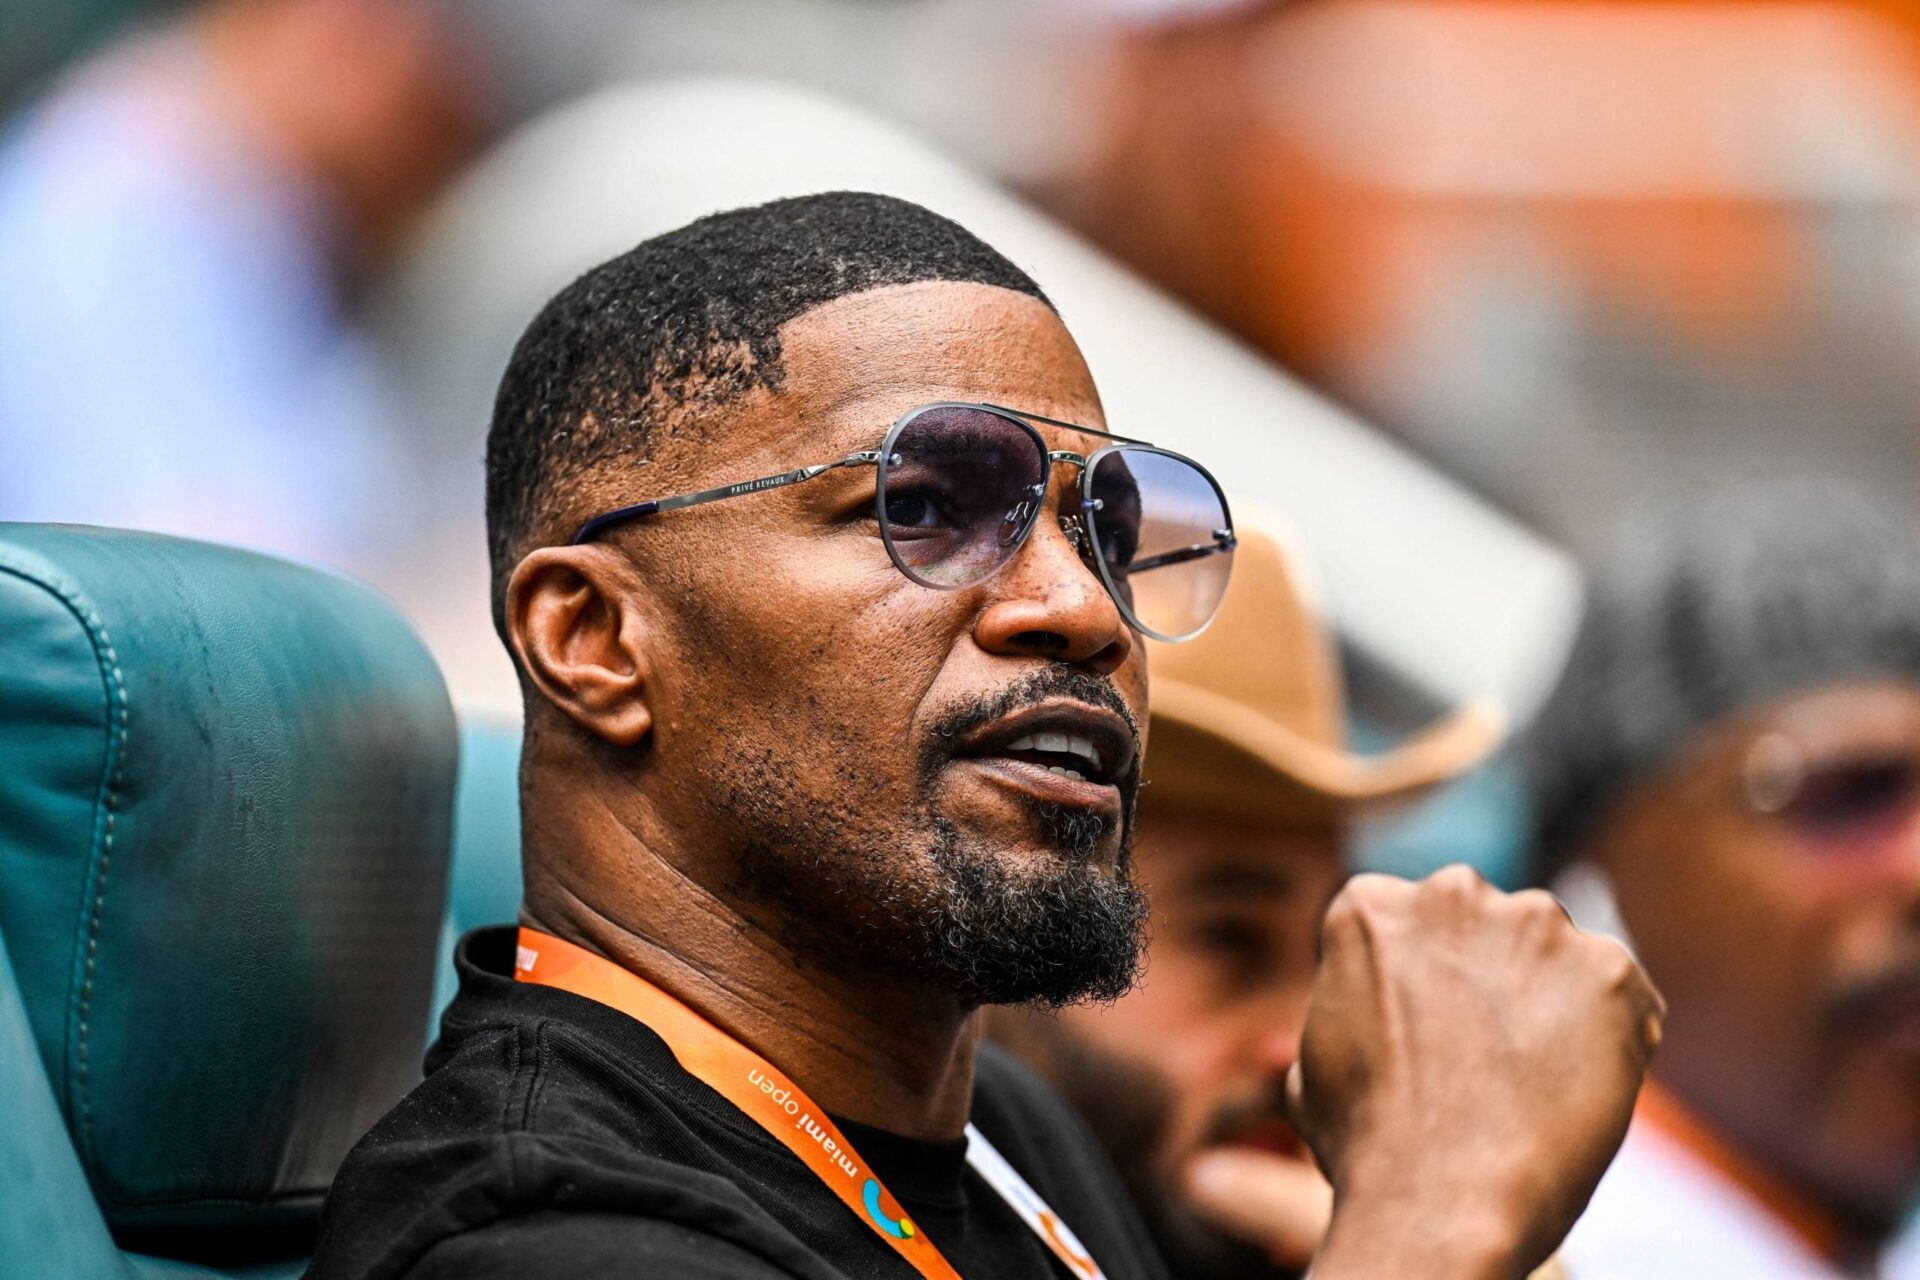 Jamie Foxx Waves To Fans In First Sighting Since His “Medical Complication”